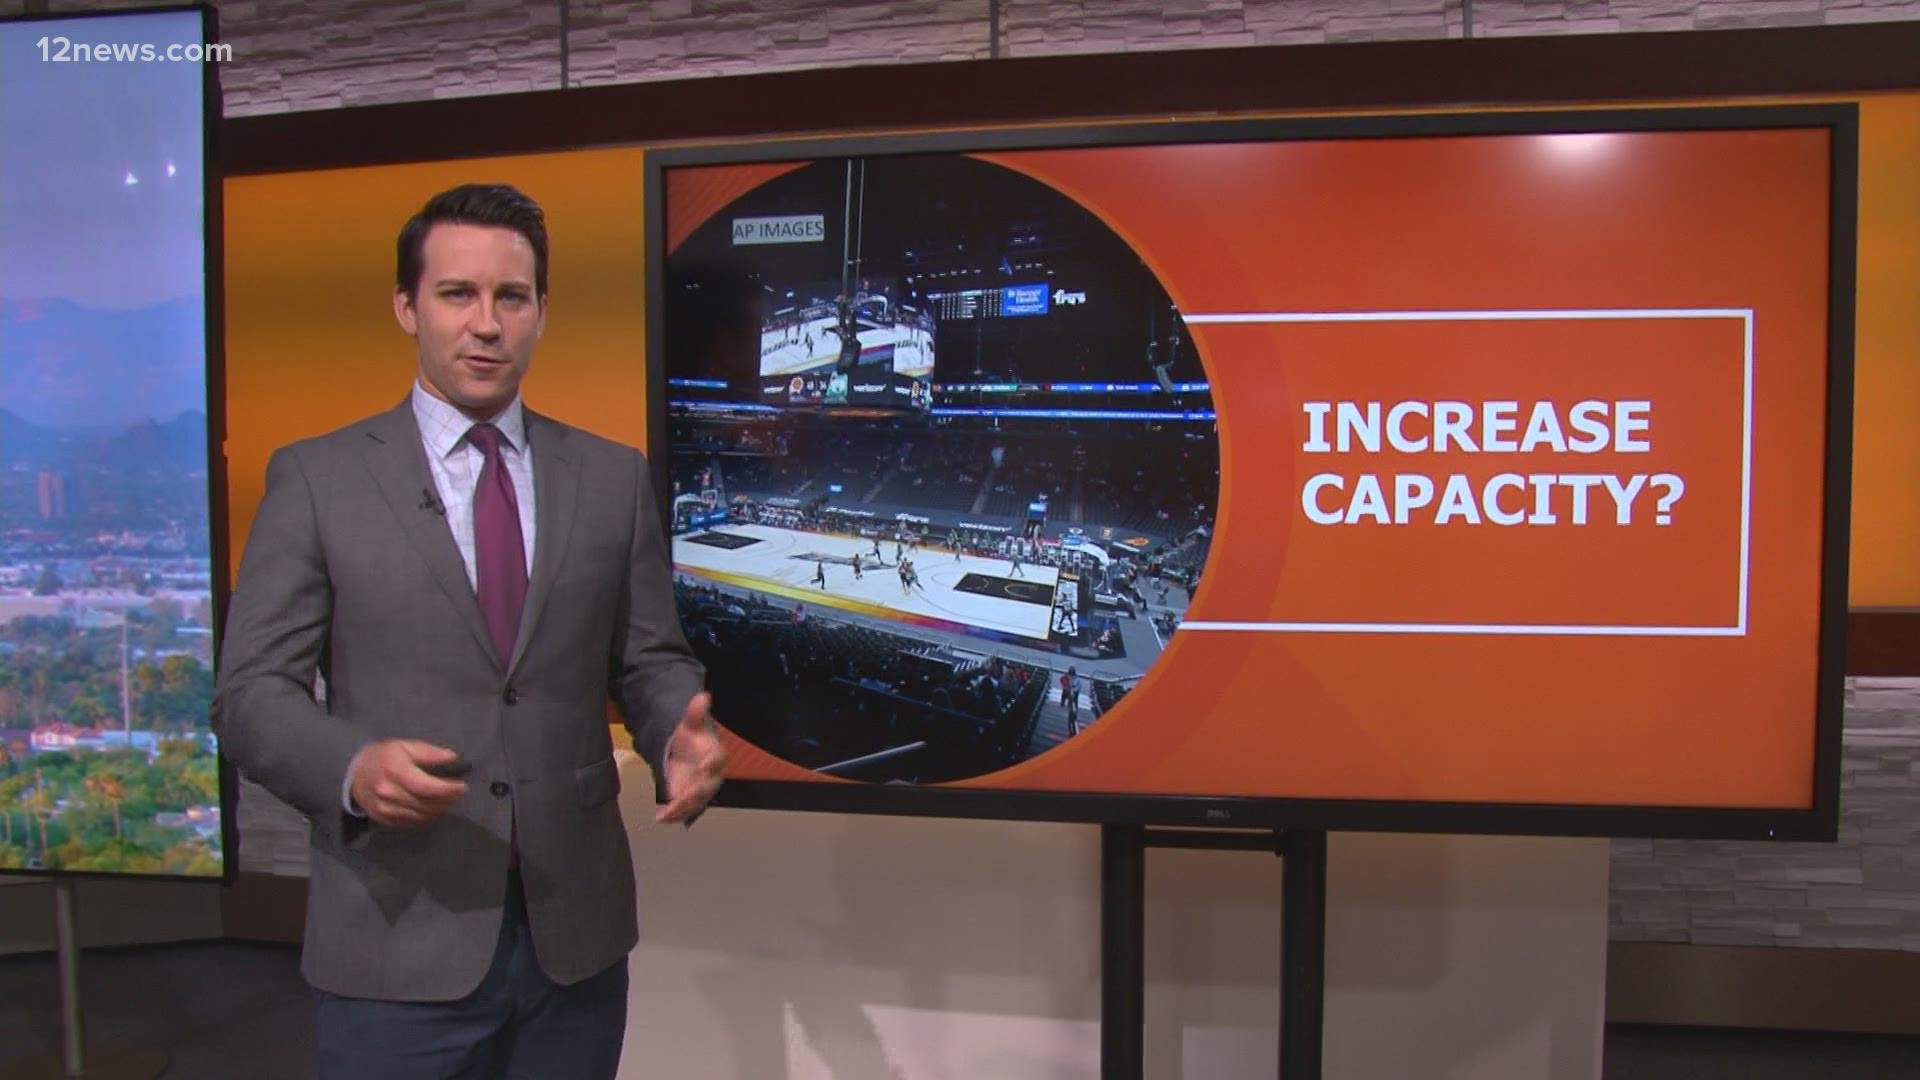 Should the Phoenix Suns expand capacity at home games? 12 News viewers weigh in.